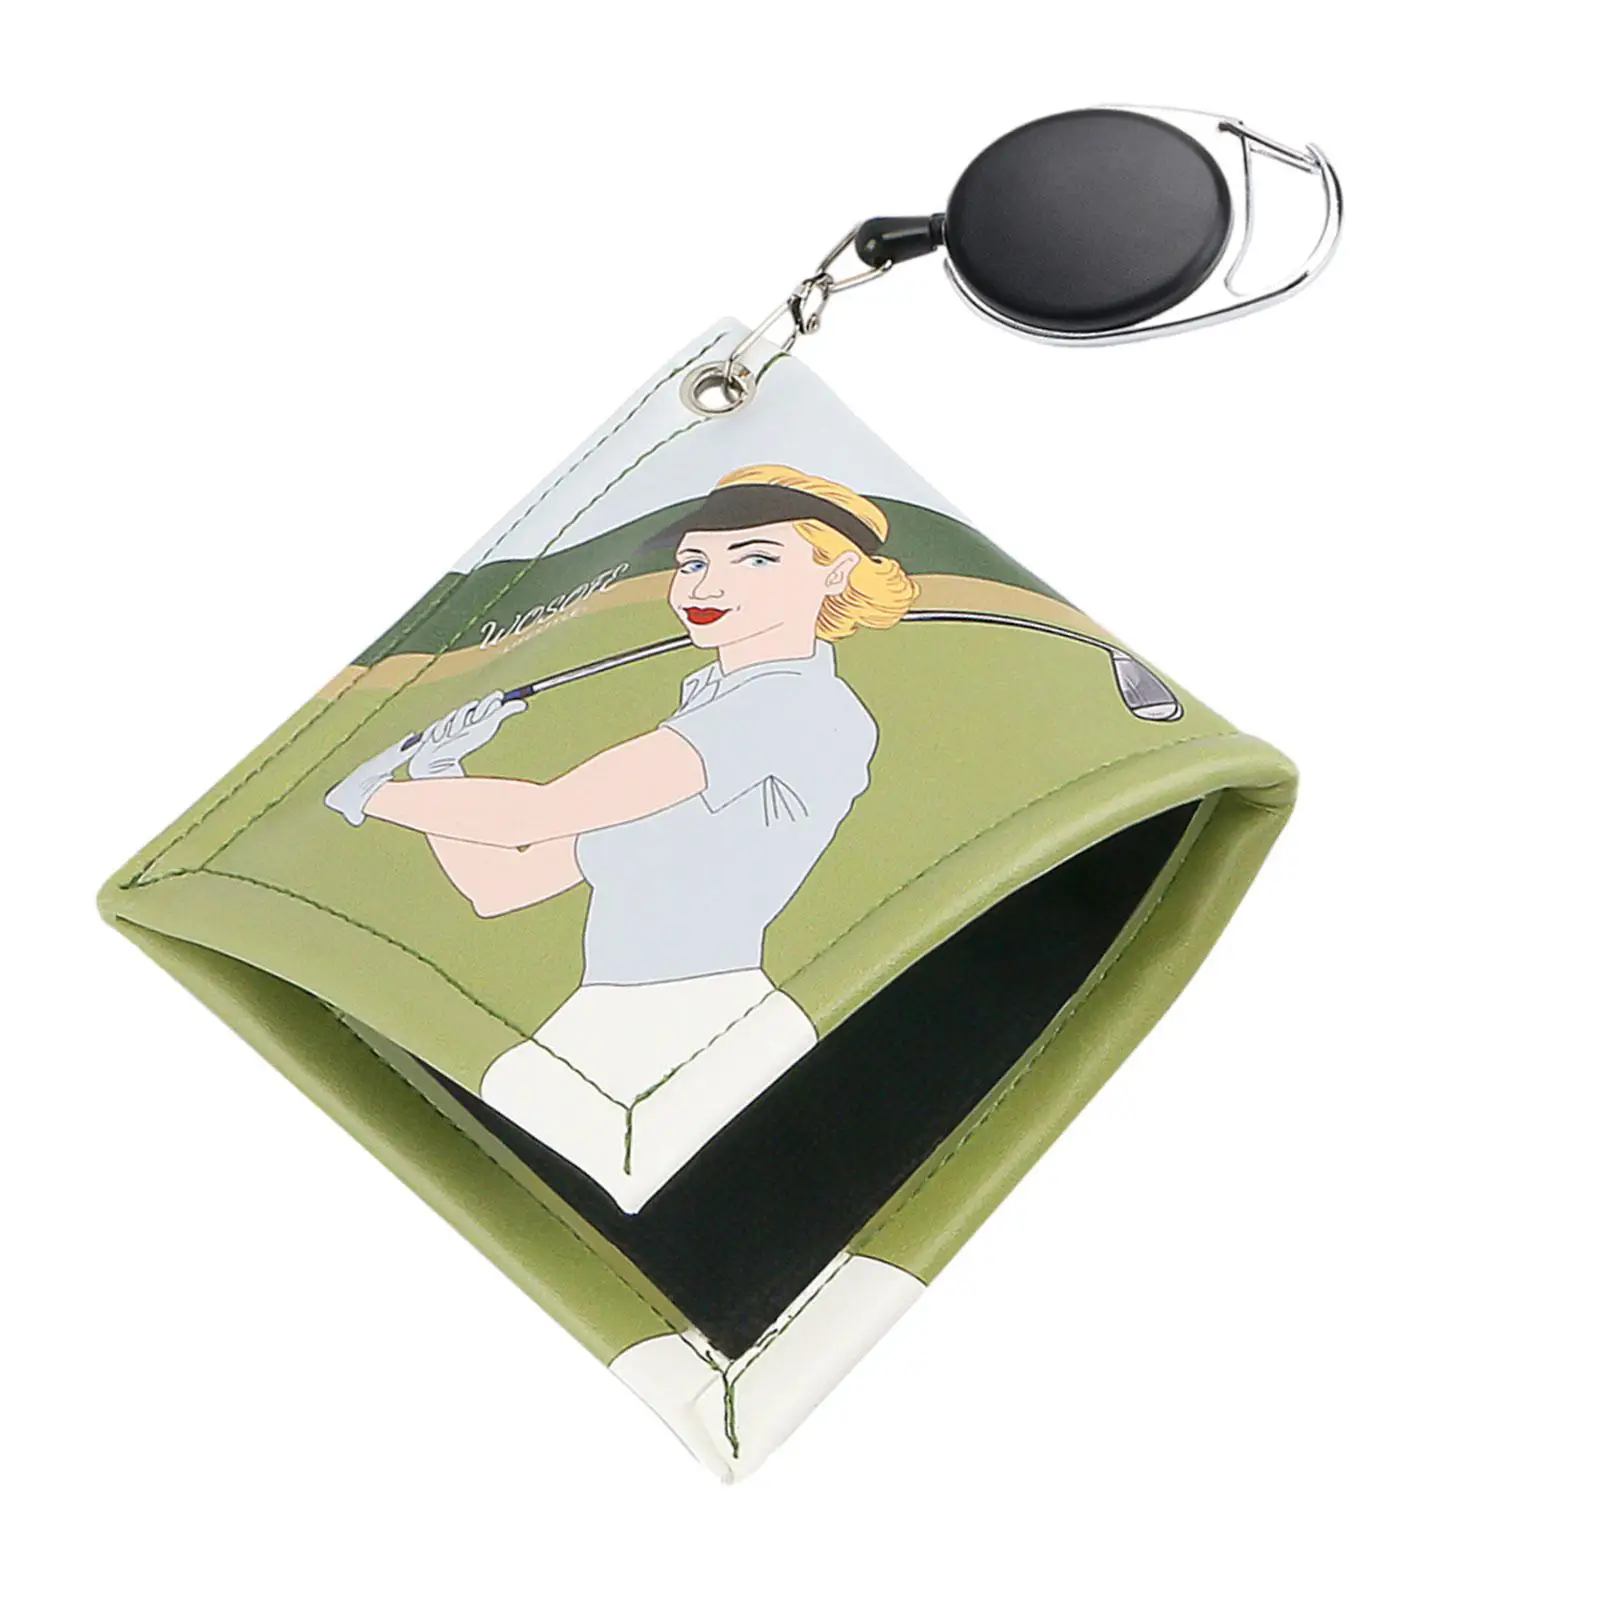 

Golf Ball Towel Golf Club Head Cleaner for Men Women with Retractable Keychain Buckle 12x12cm Golf Ball Cleaner Pocket